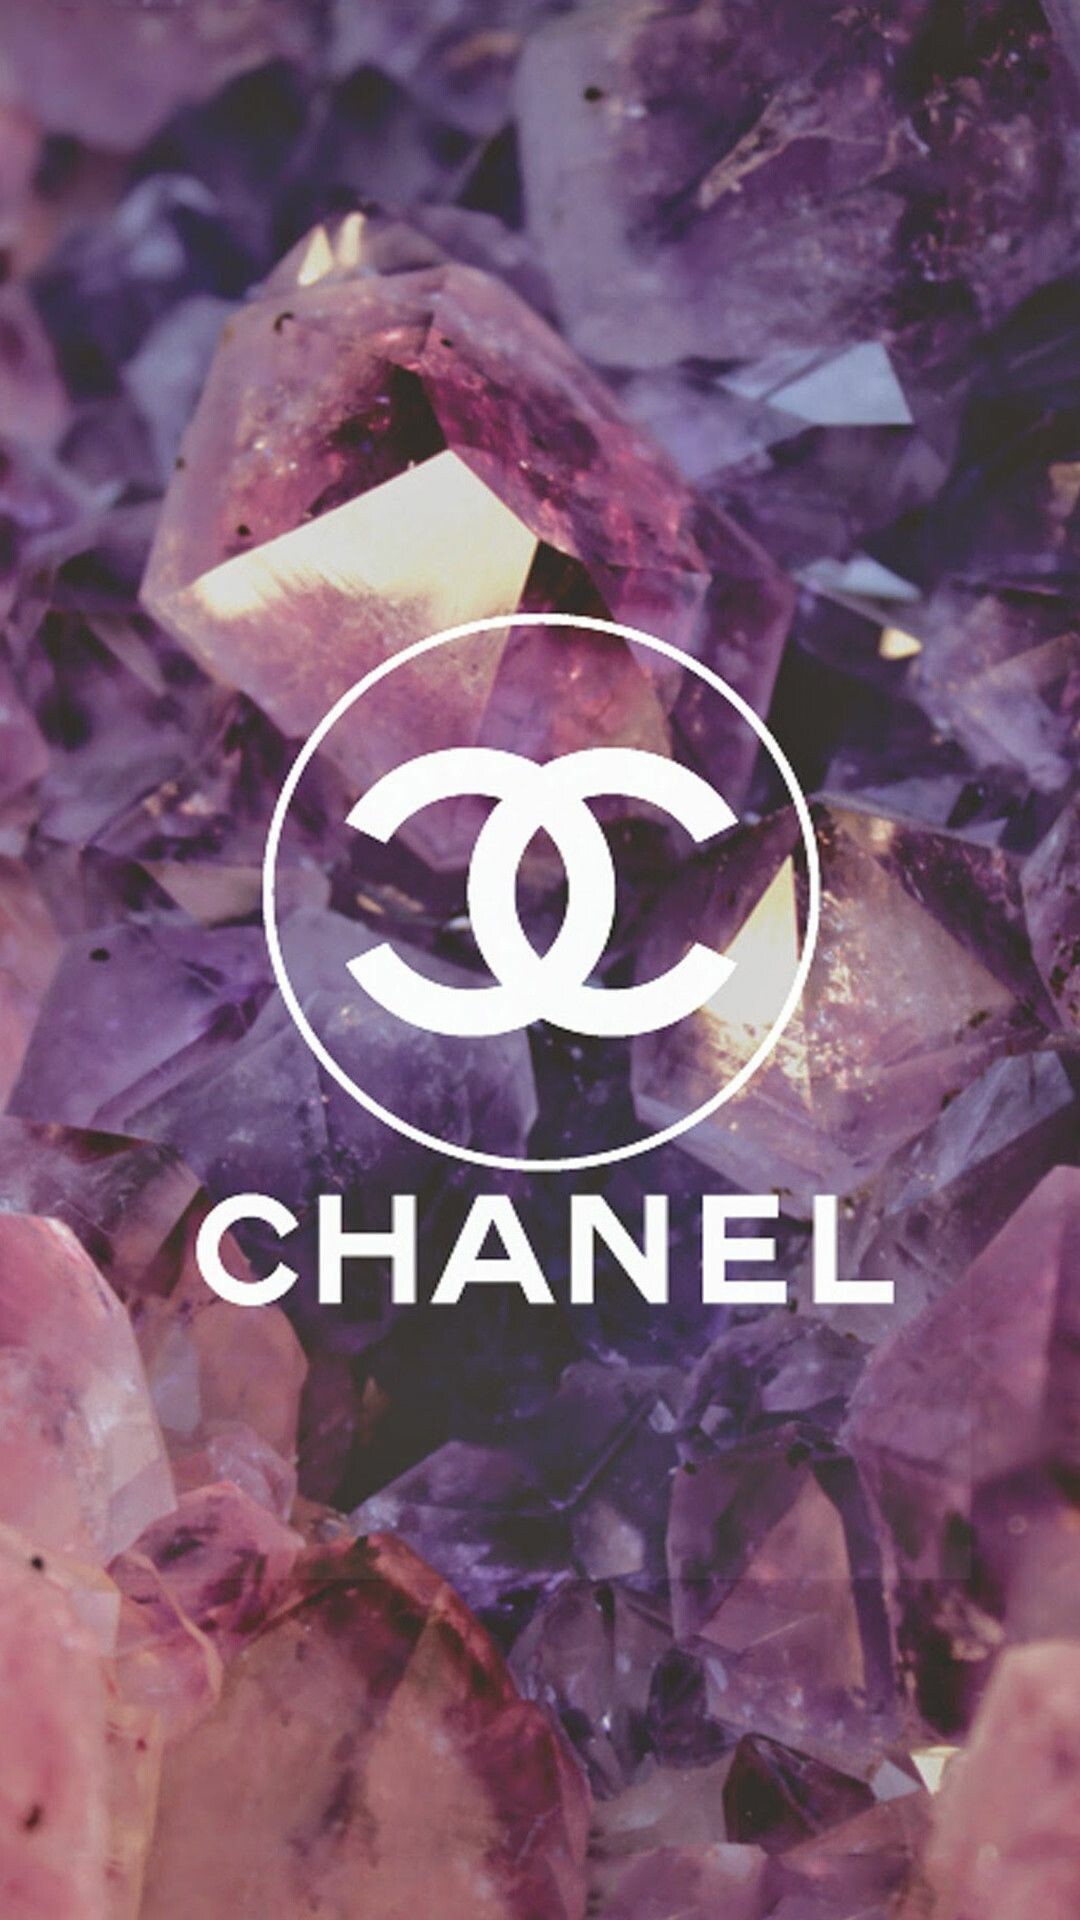 Chanel: A private company and world leader in creating, developing, manufacturing, and distributing a broad range of high-end creations. 1080x1920 Full HD Background.